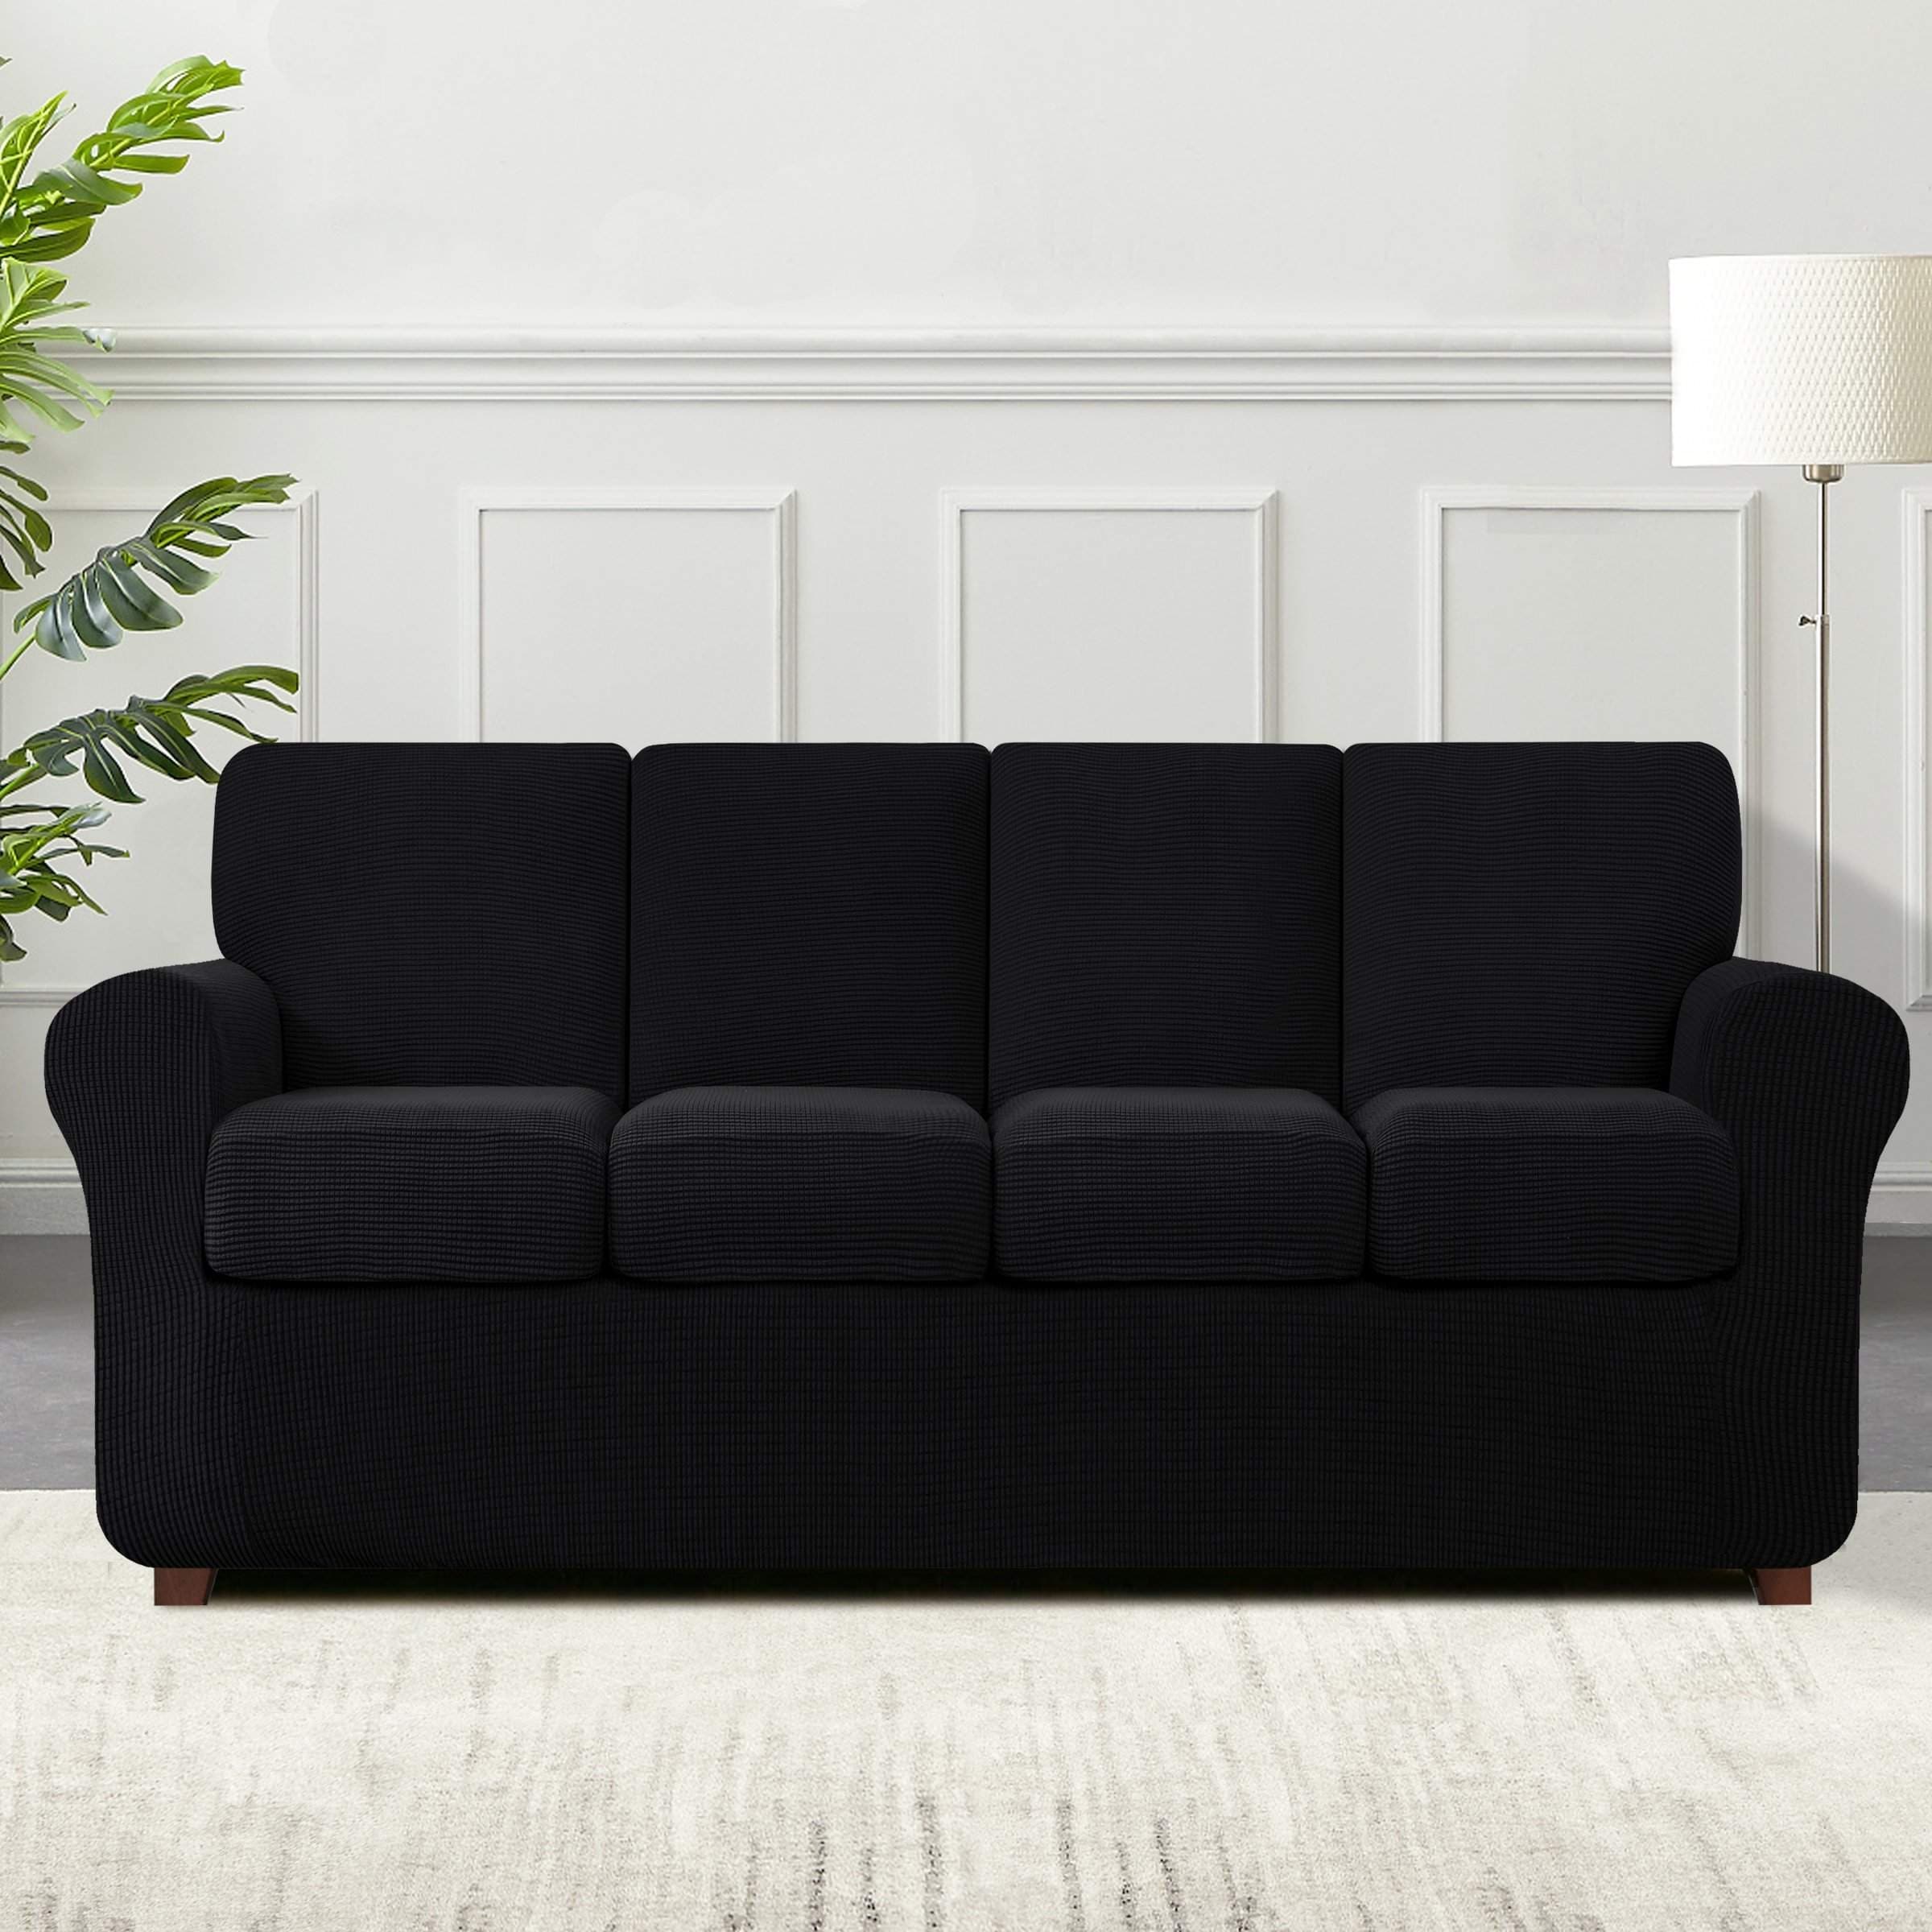 https://ak1.ostkcdn.com/images/products/is/images/direct/d42d0c39b87967cc598e4d525c8a54d433e85629/Subrtex-9-Piece-Stretch-XL-Sofa-Slipcover-Sets-with-4-Backrest-Cushion-Covers-and-4-Seat-Cushion-Covers.jpg